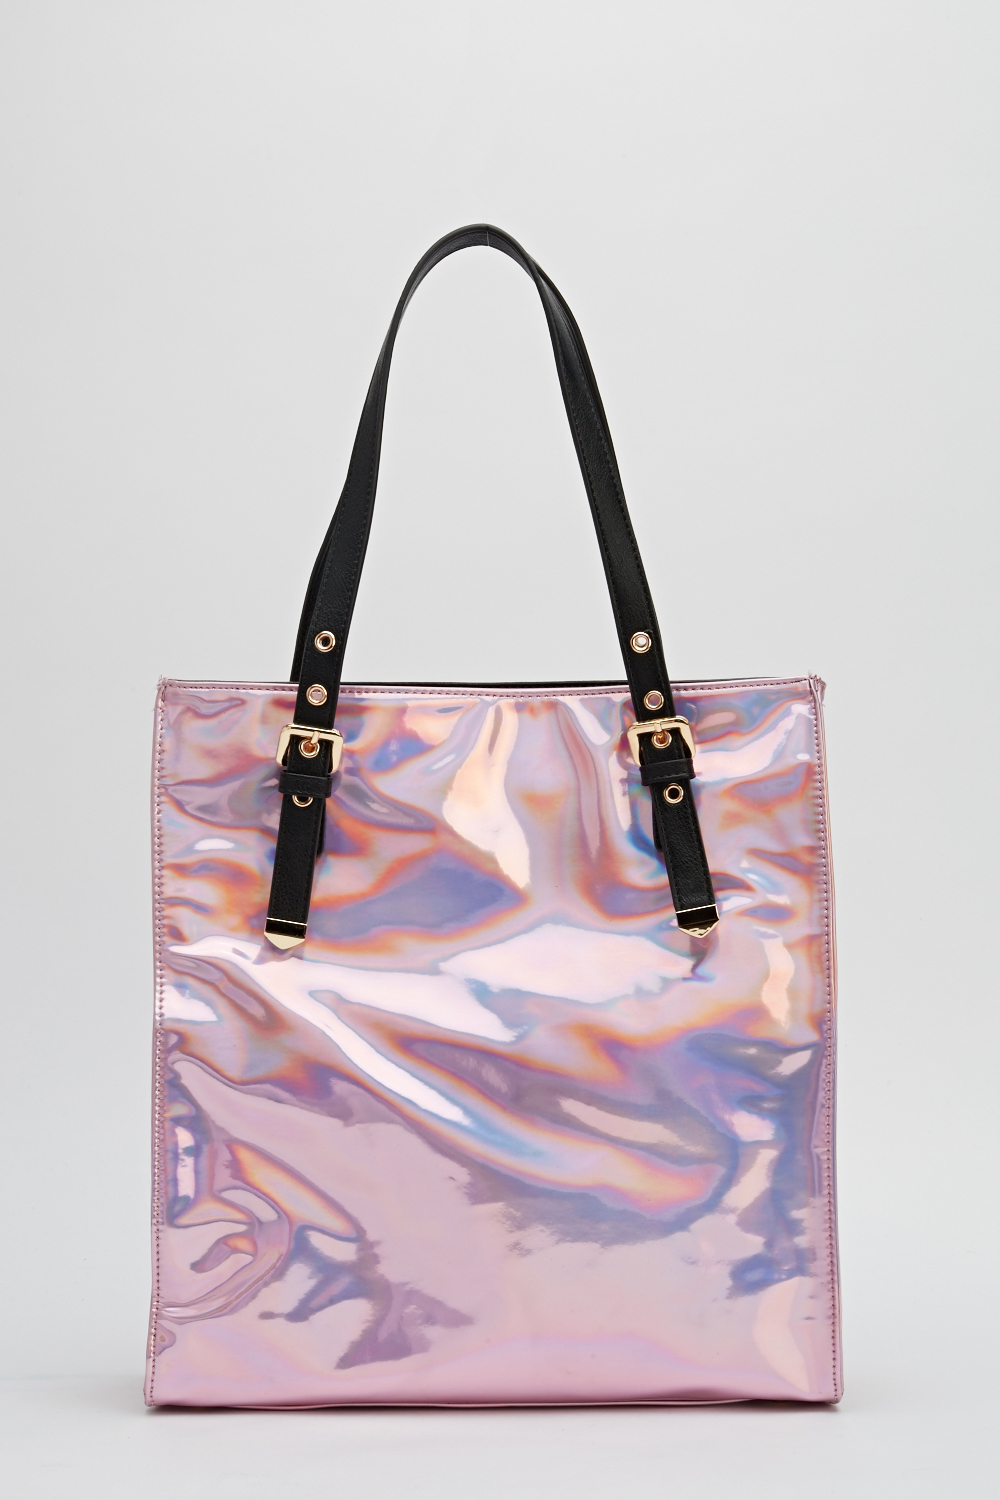 Holographic Tote Bag - Just $7